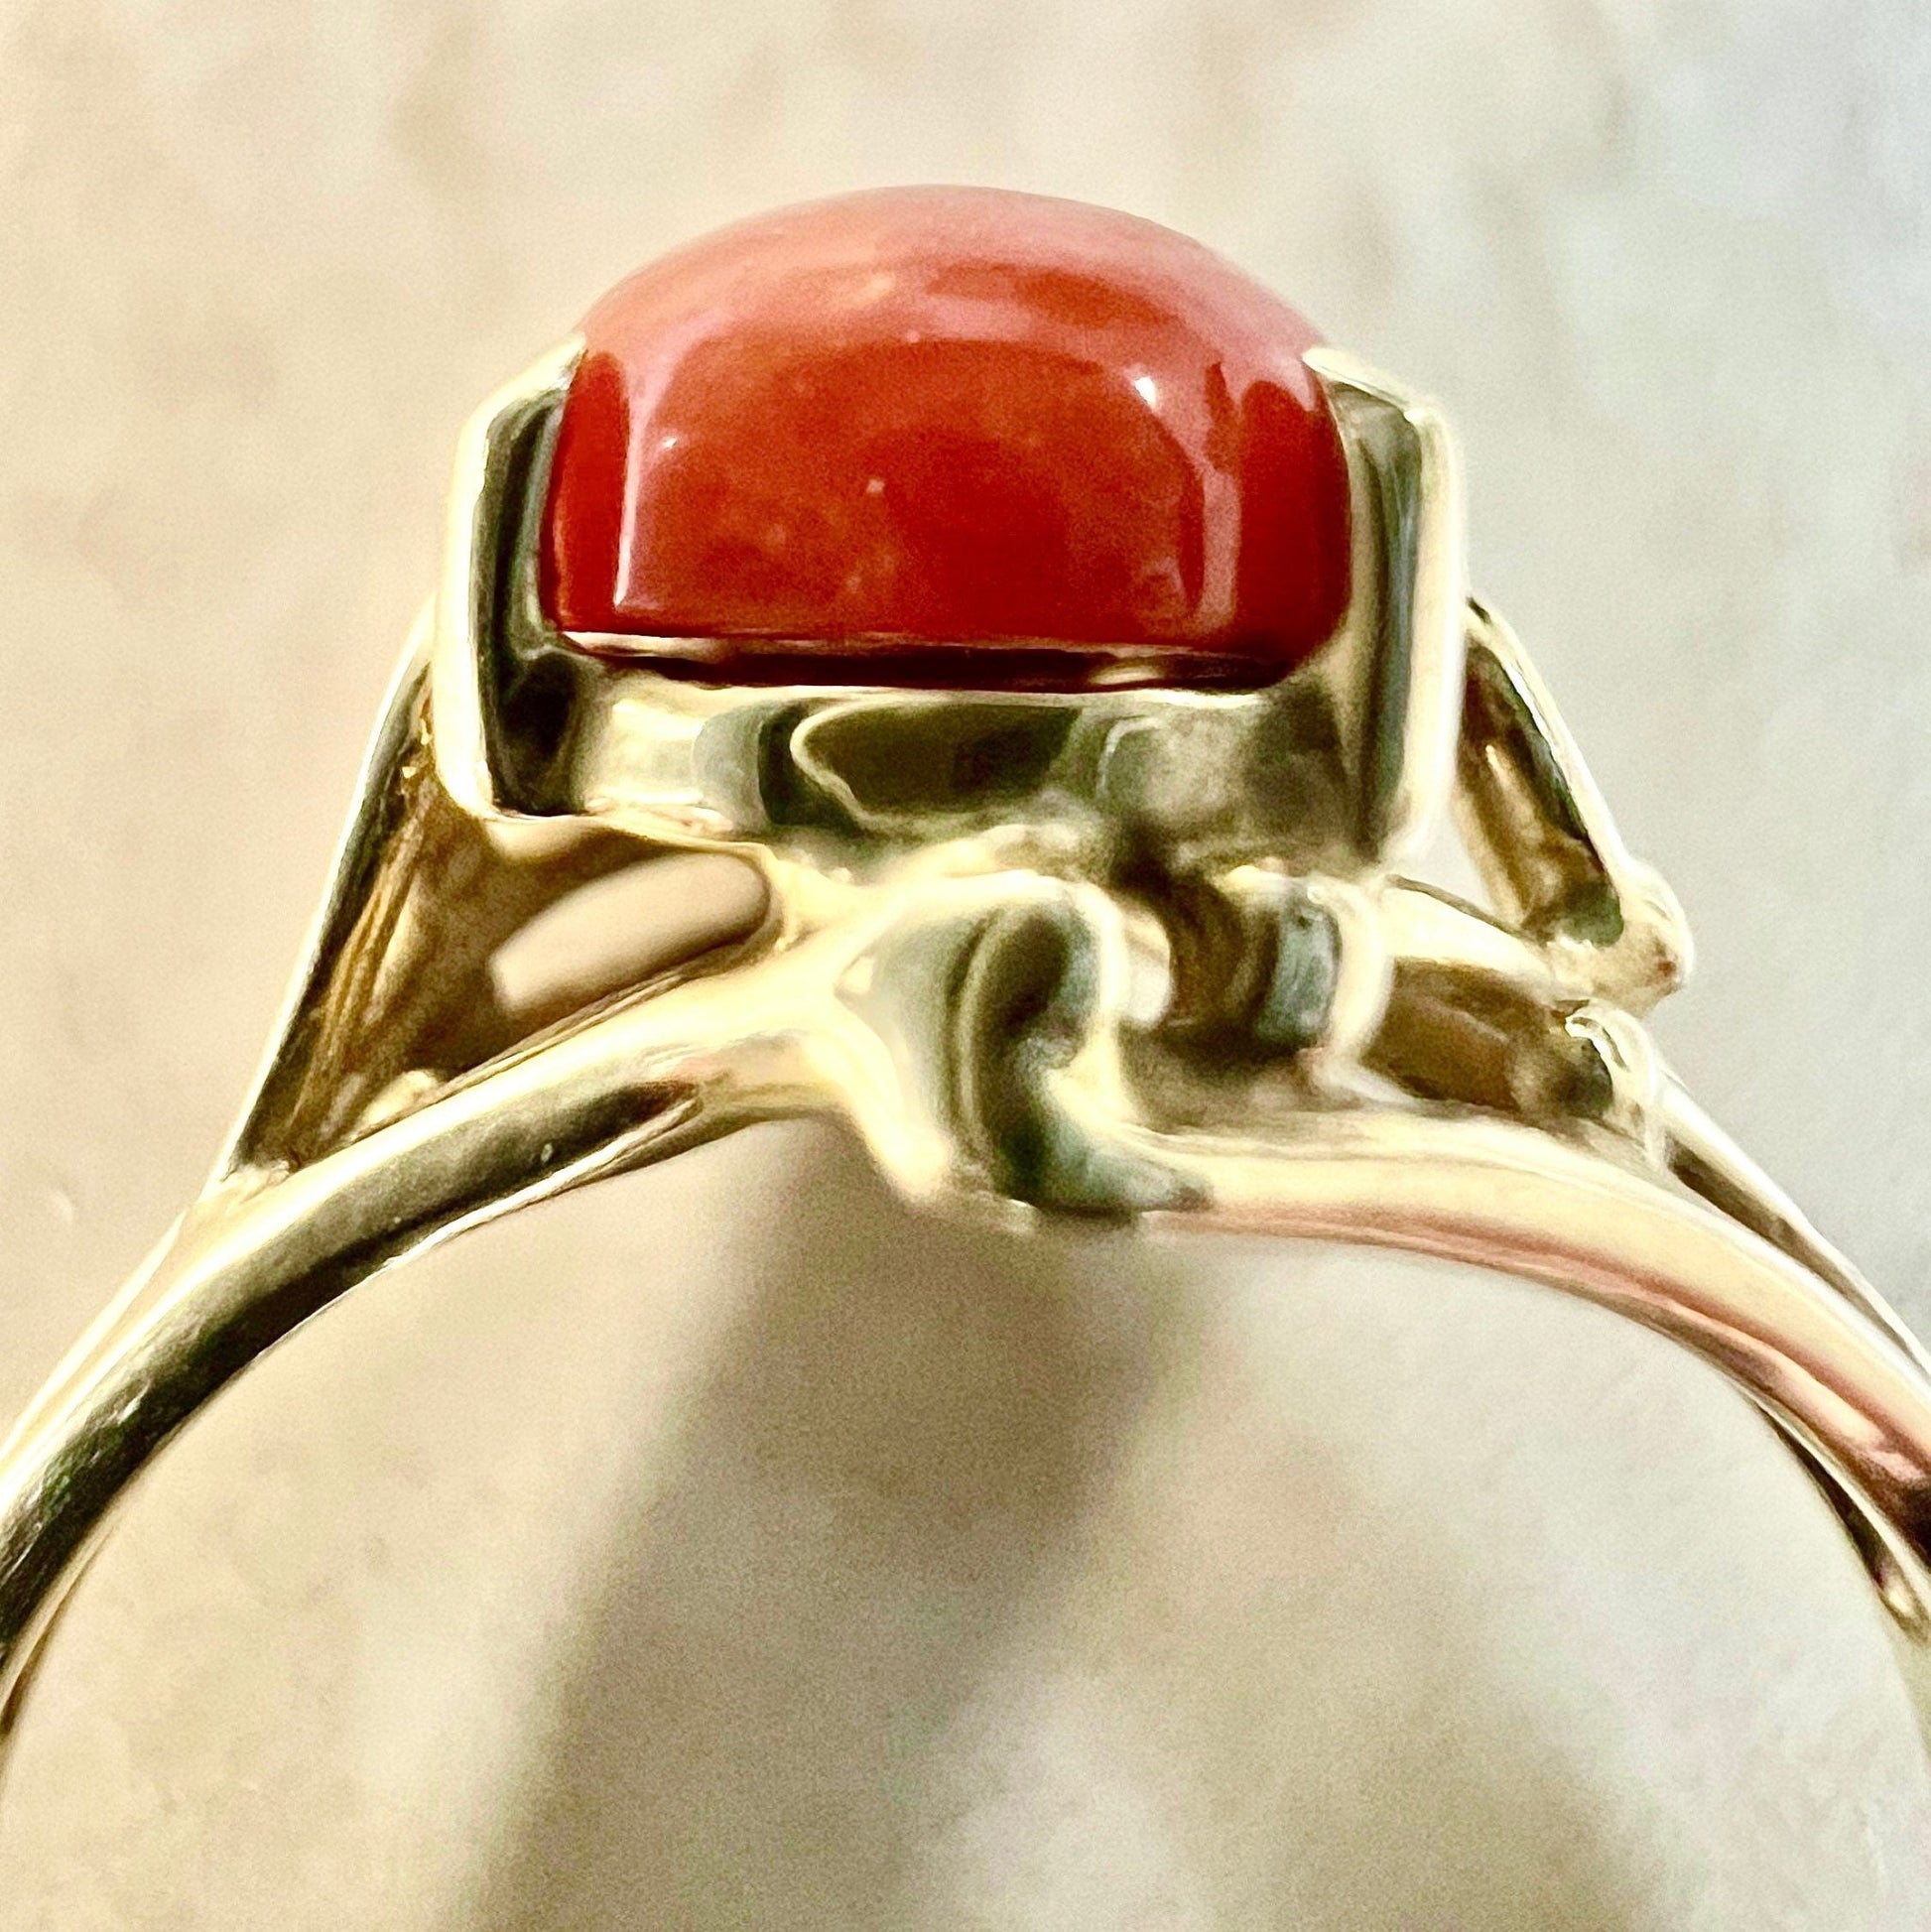 Vintage 14K Coral Solitaire Ring - Red Coral Ring - Gold Coral Ring - Minimalist Ring - Coral Jewelry - Vintage Ring - 14K Solid Gold Ring